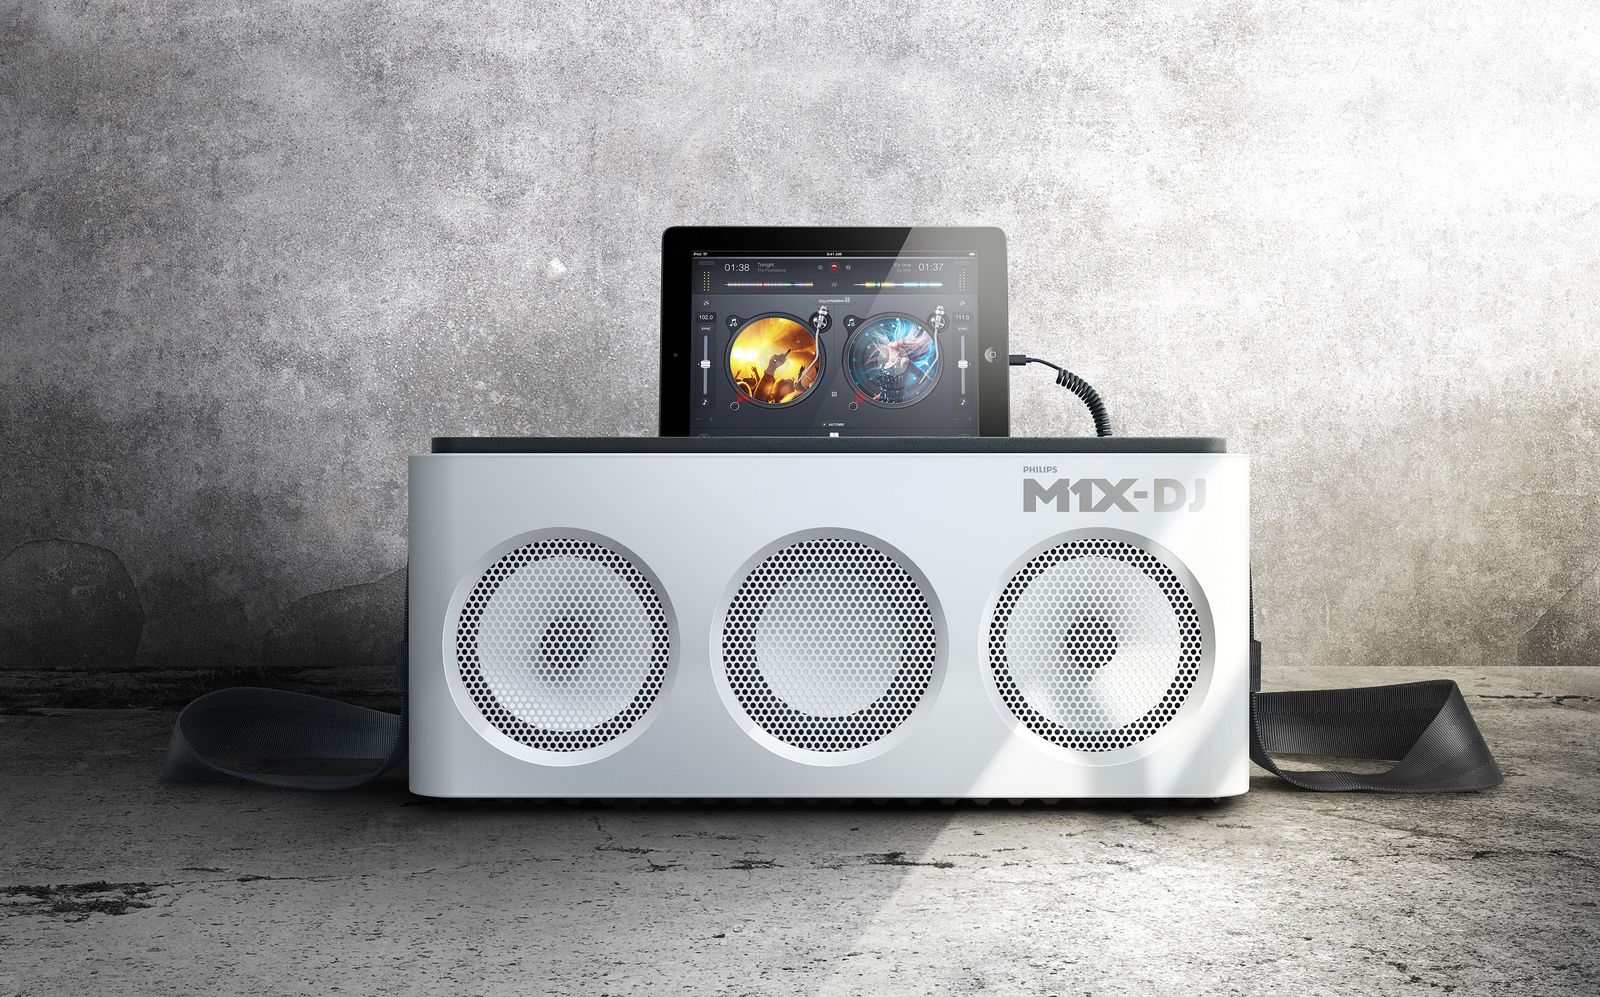 philips m1x dj sound system rocks on to the scene ipad dock and mixing decks in one image 1